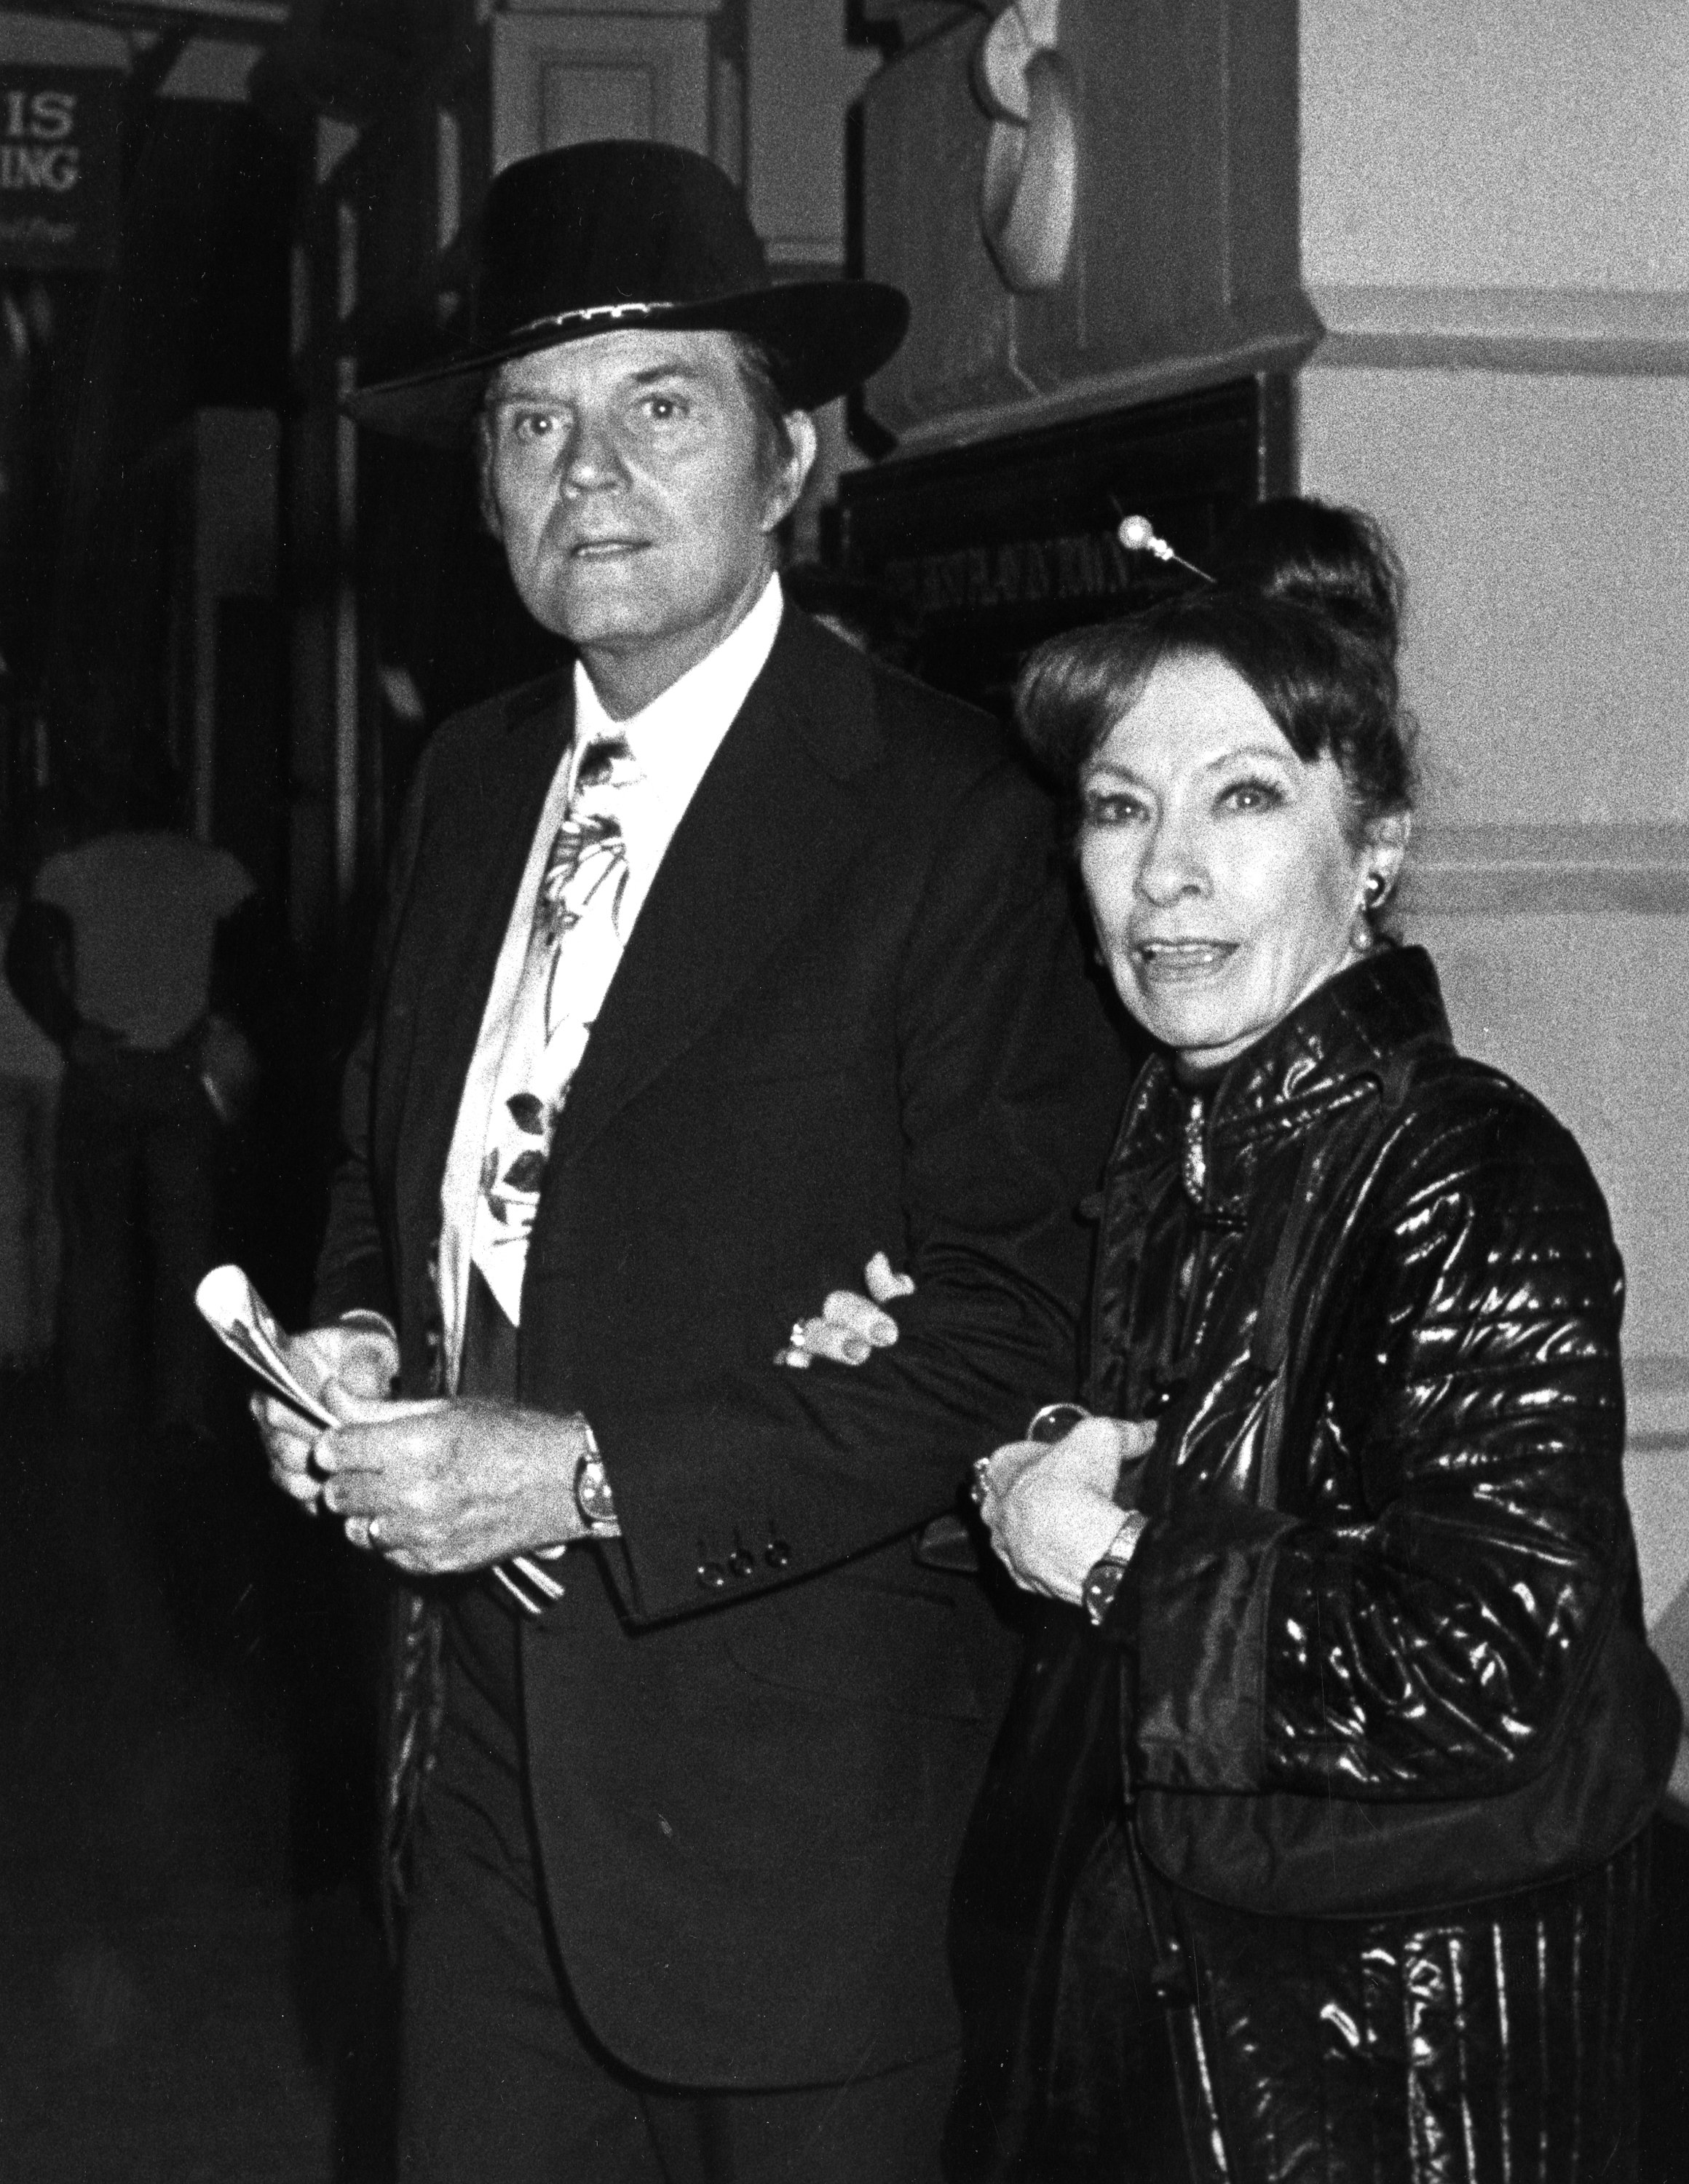 Actor Jack Lord and wife Gloria Berlin attend the premiere of "Morning At 7" on October 11, 1980 at the Lyceum Theater in New York City. | Source: Getty Images